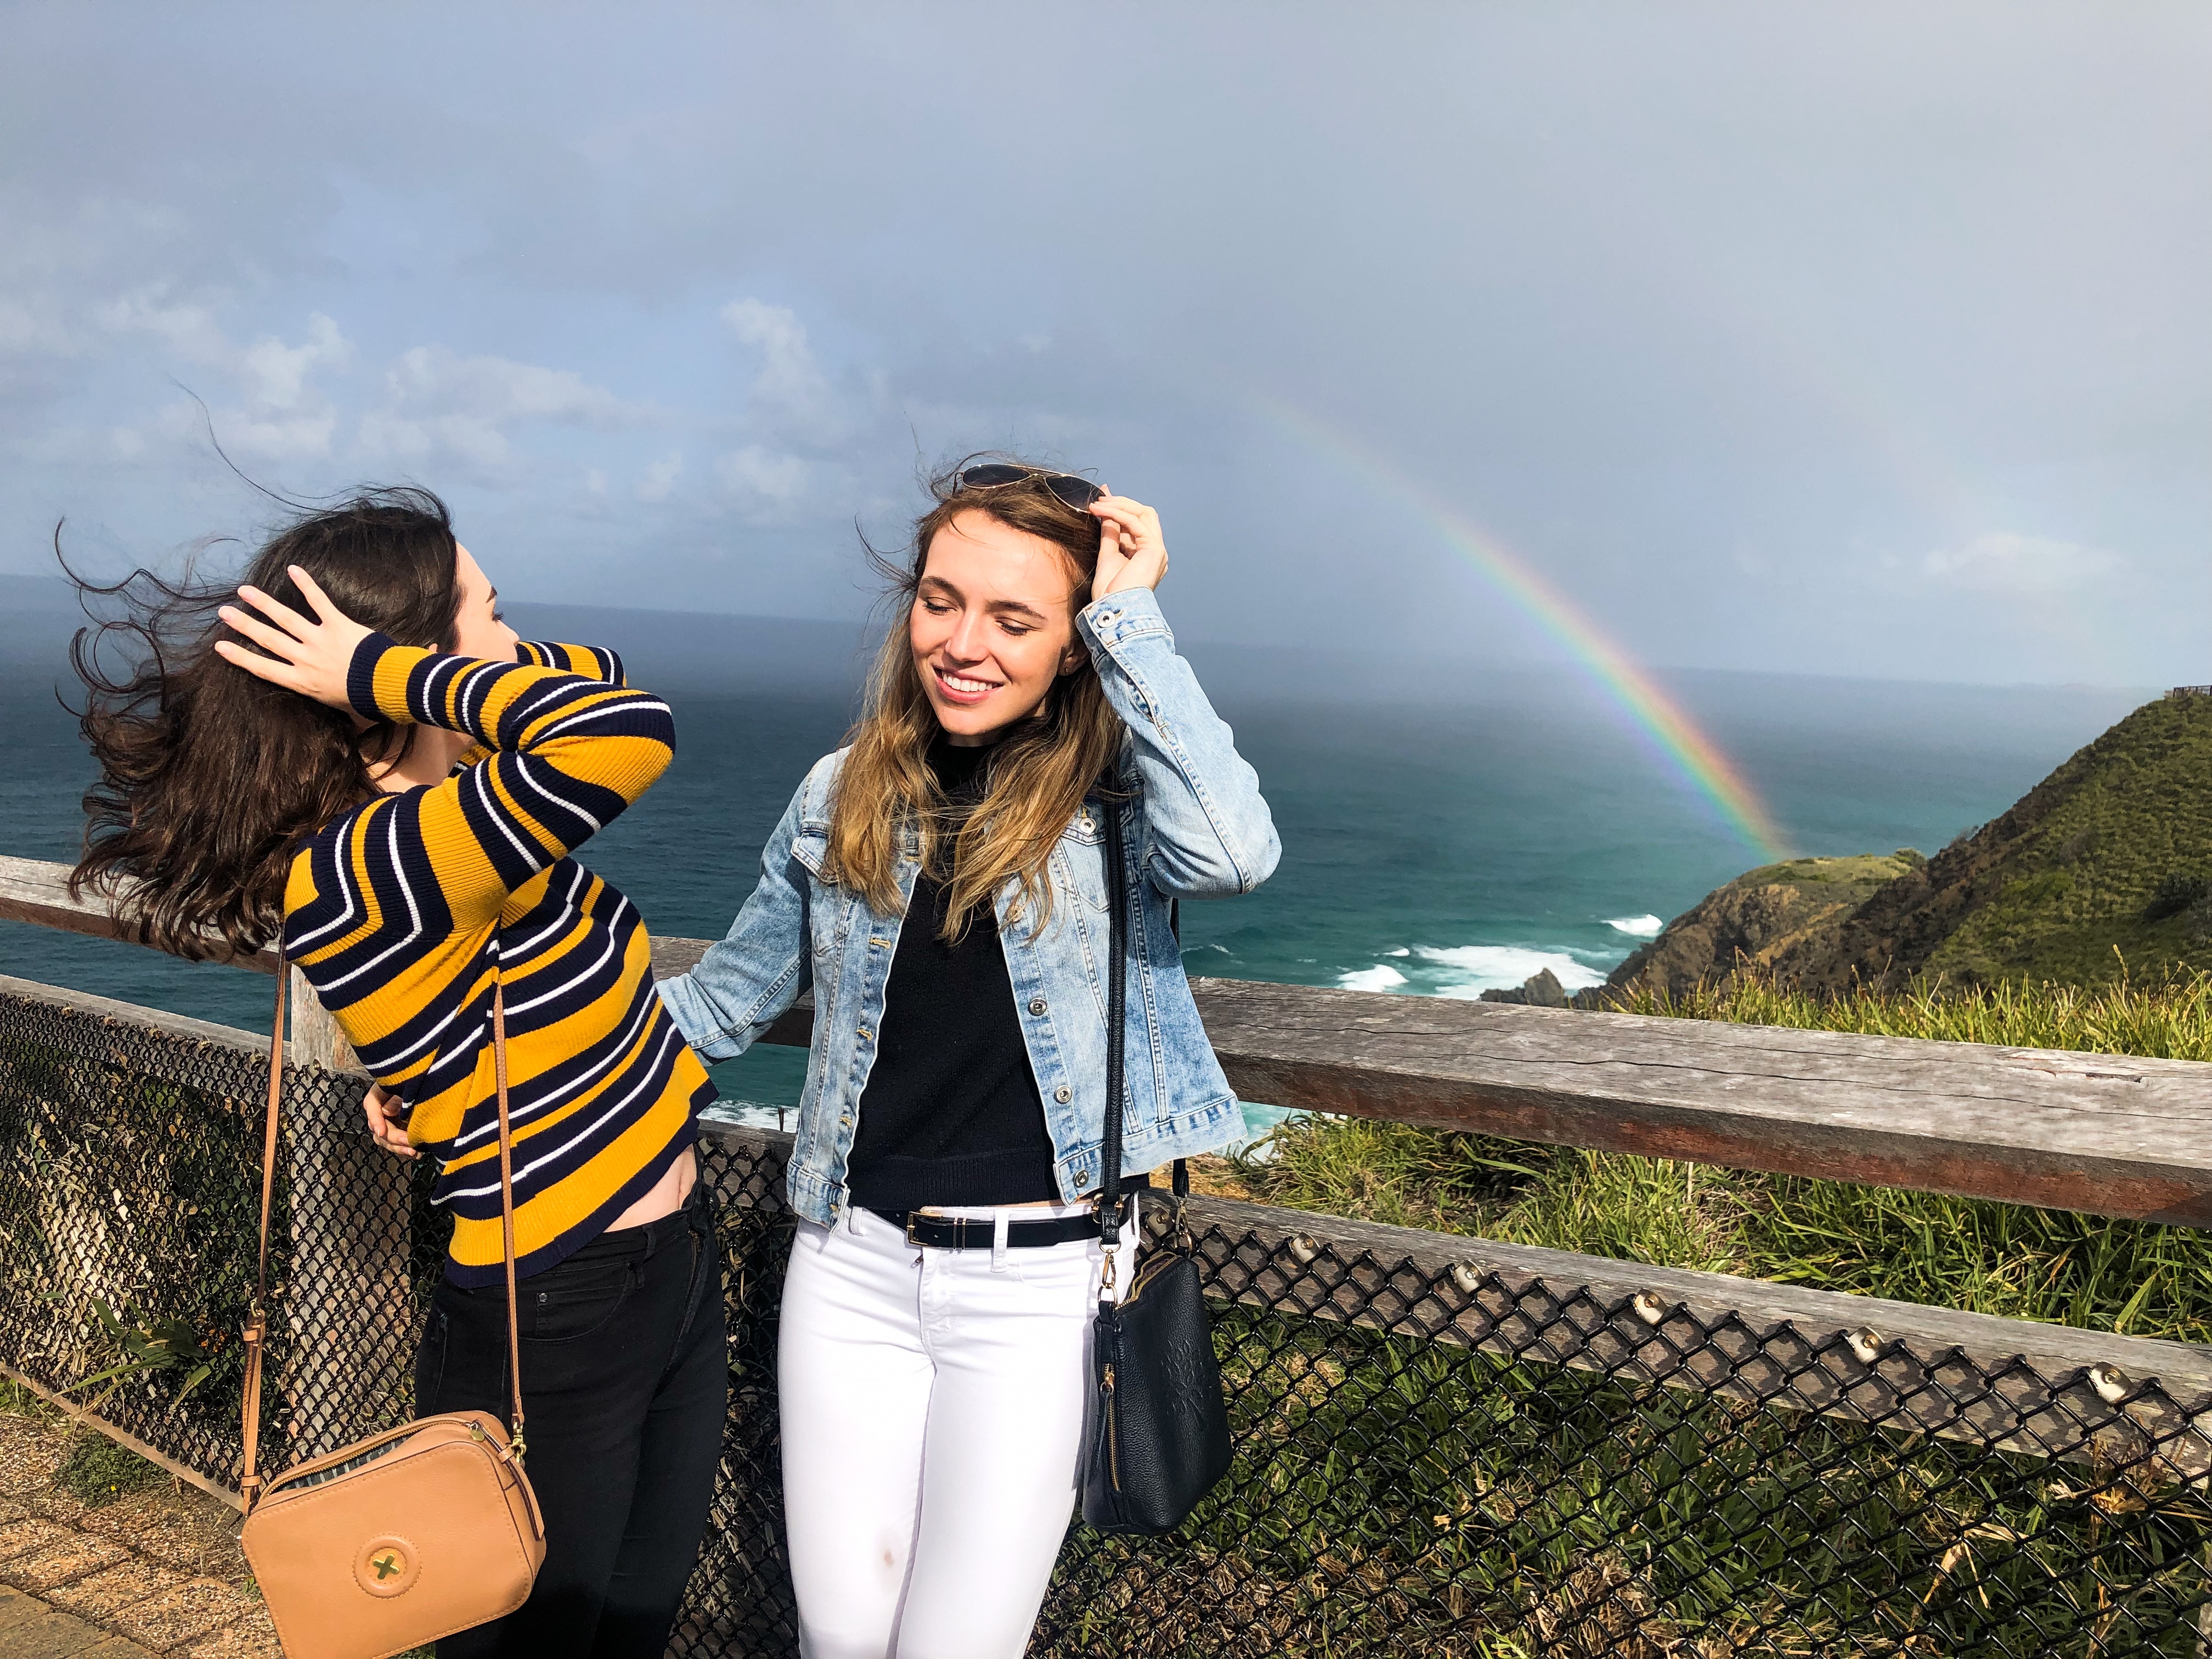 Watch out for the wind at Cape Byron - the most easterly point of Australia!